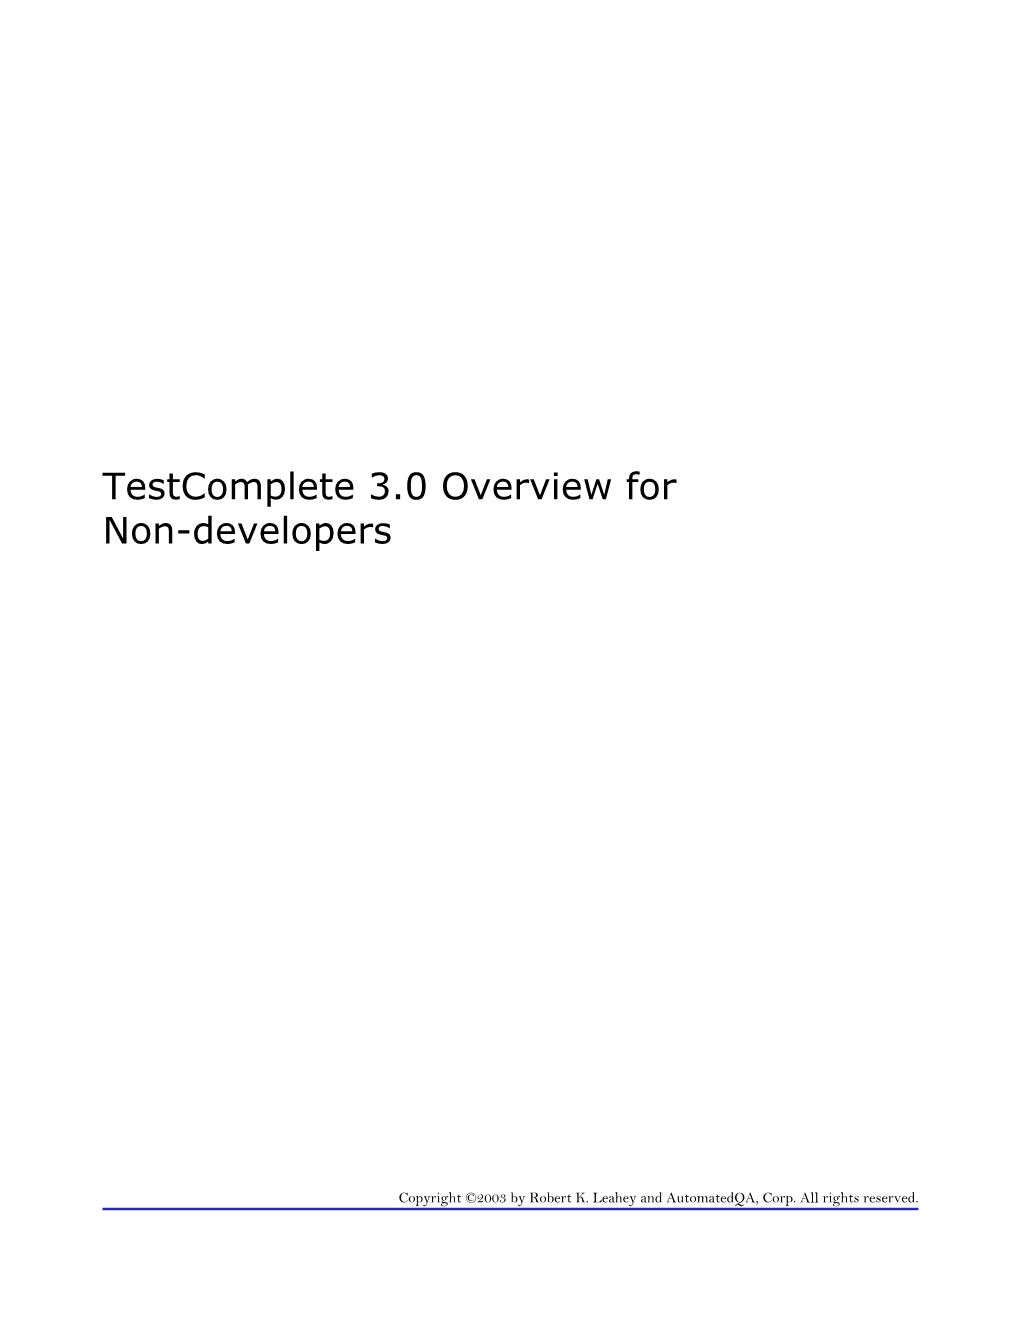 Testcomplete 3.0 Overview for Non-Developers